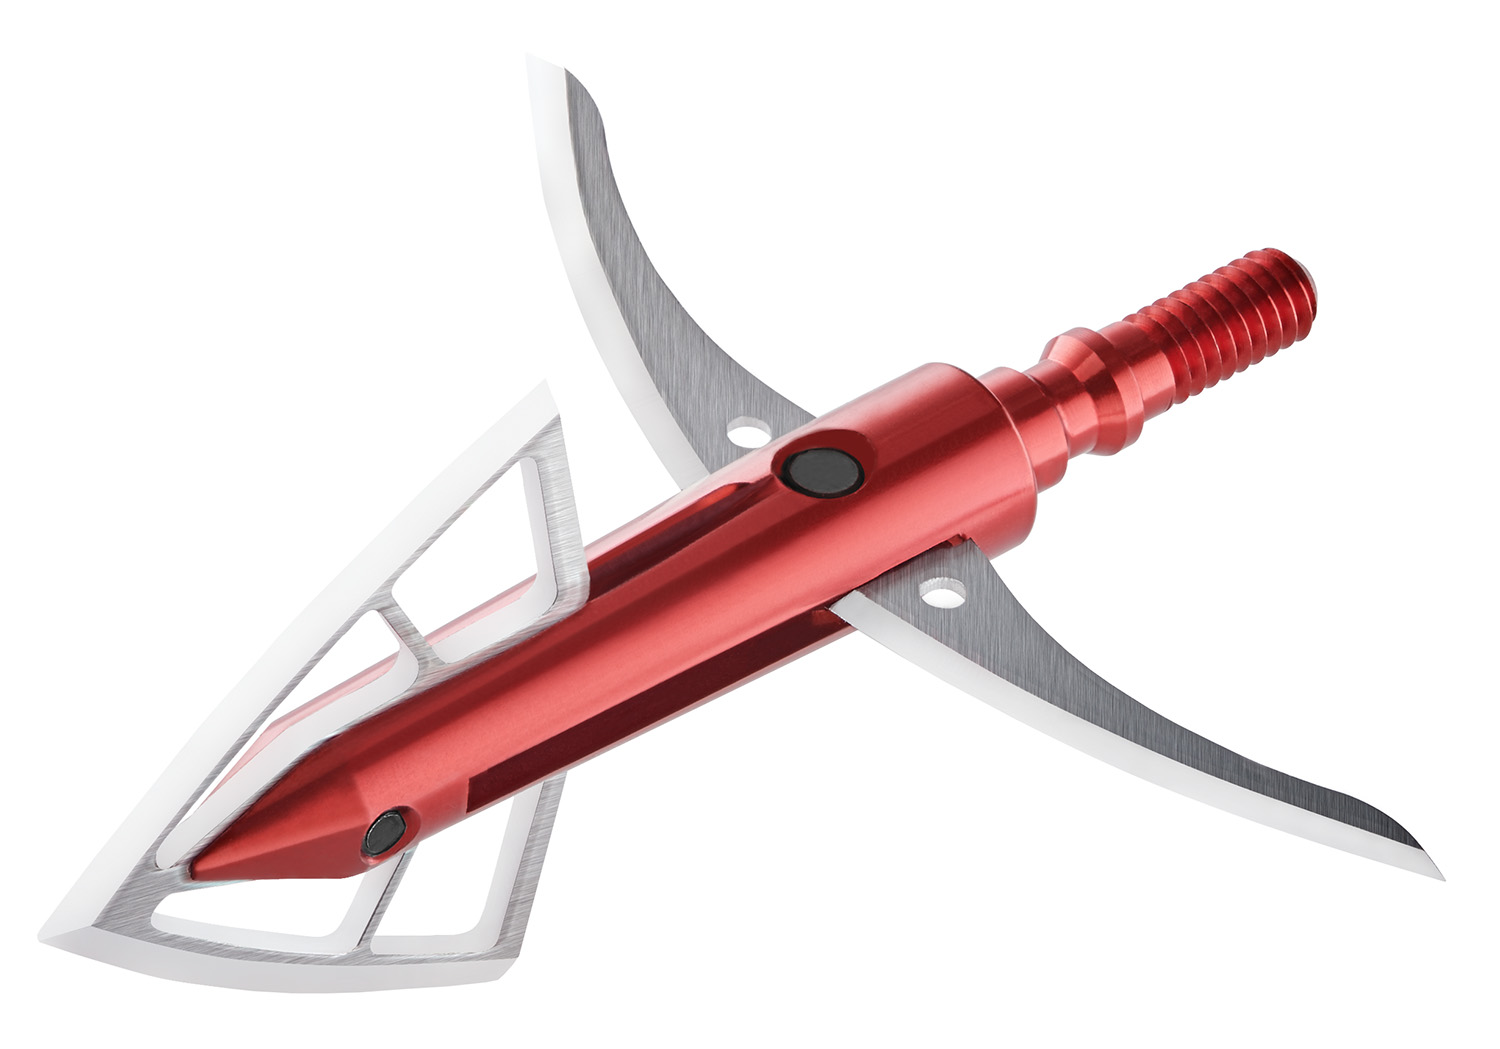 Bloodsport BLS10821 Gravedigger Extreme Broadhead Hybrid Mechanical Cut-On-Contact Tip Stainless Steel Blades Red 100 gr 3 Pk